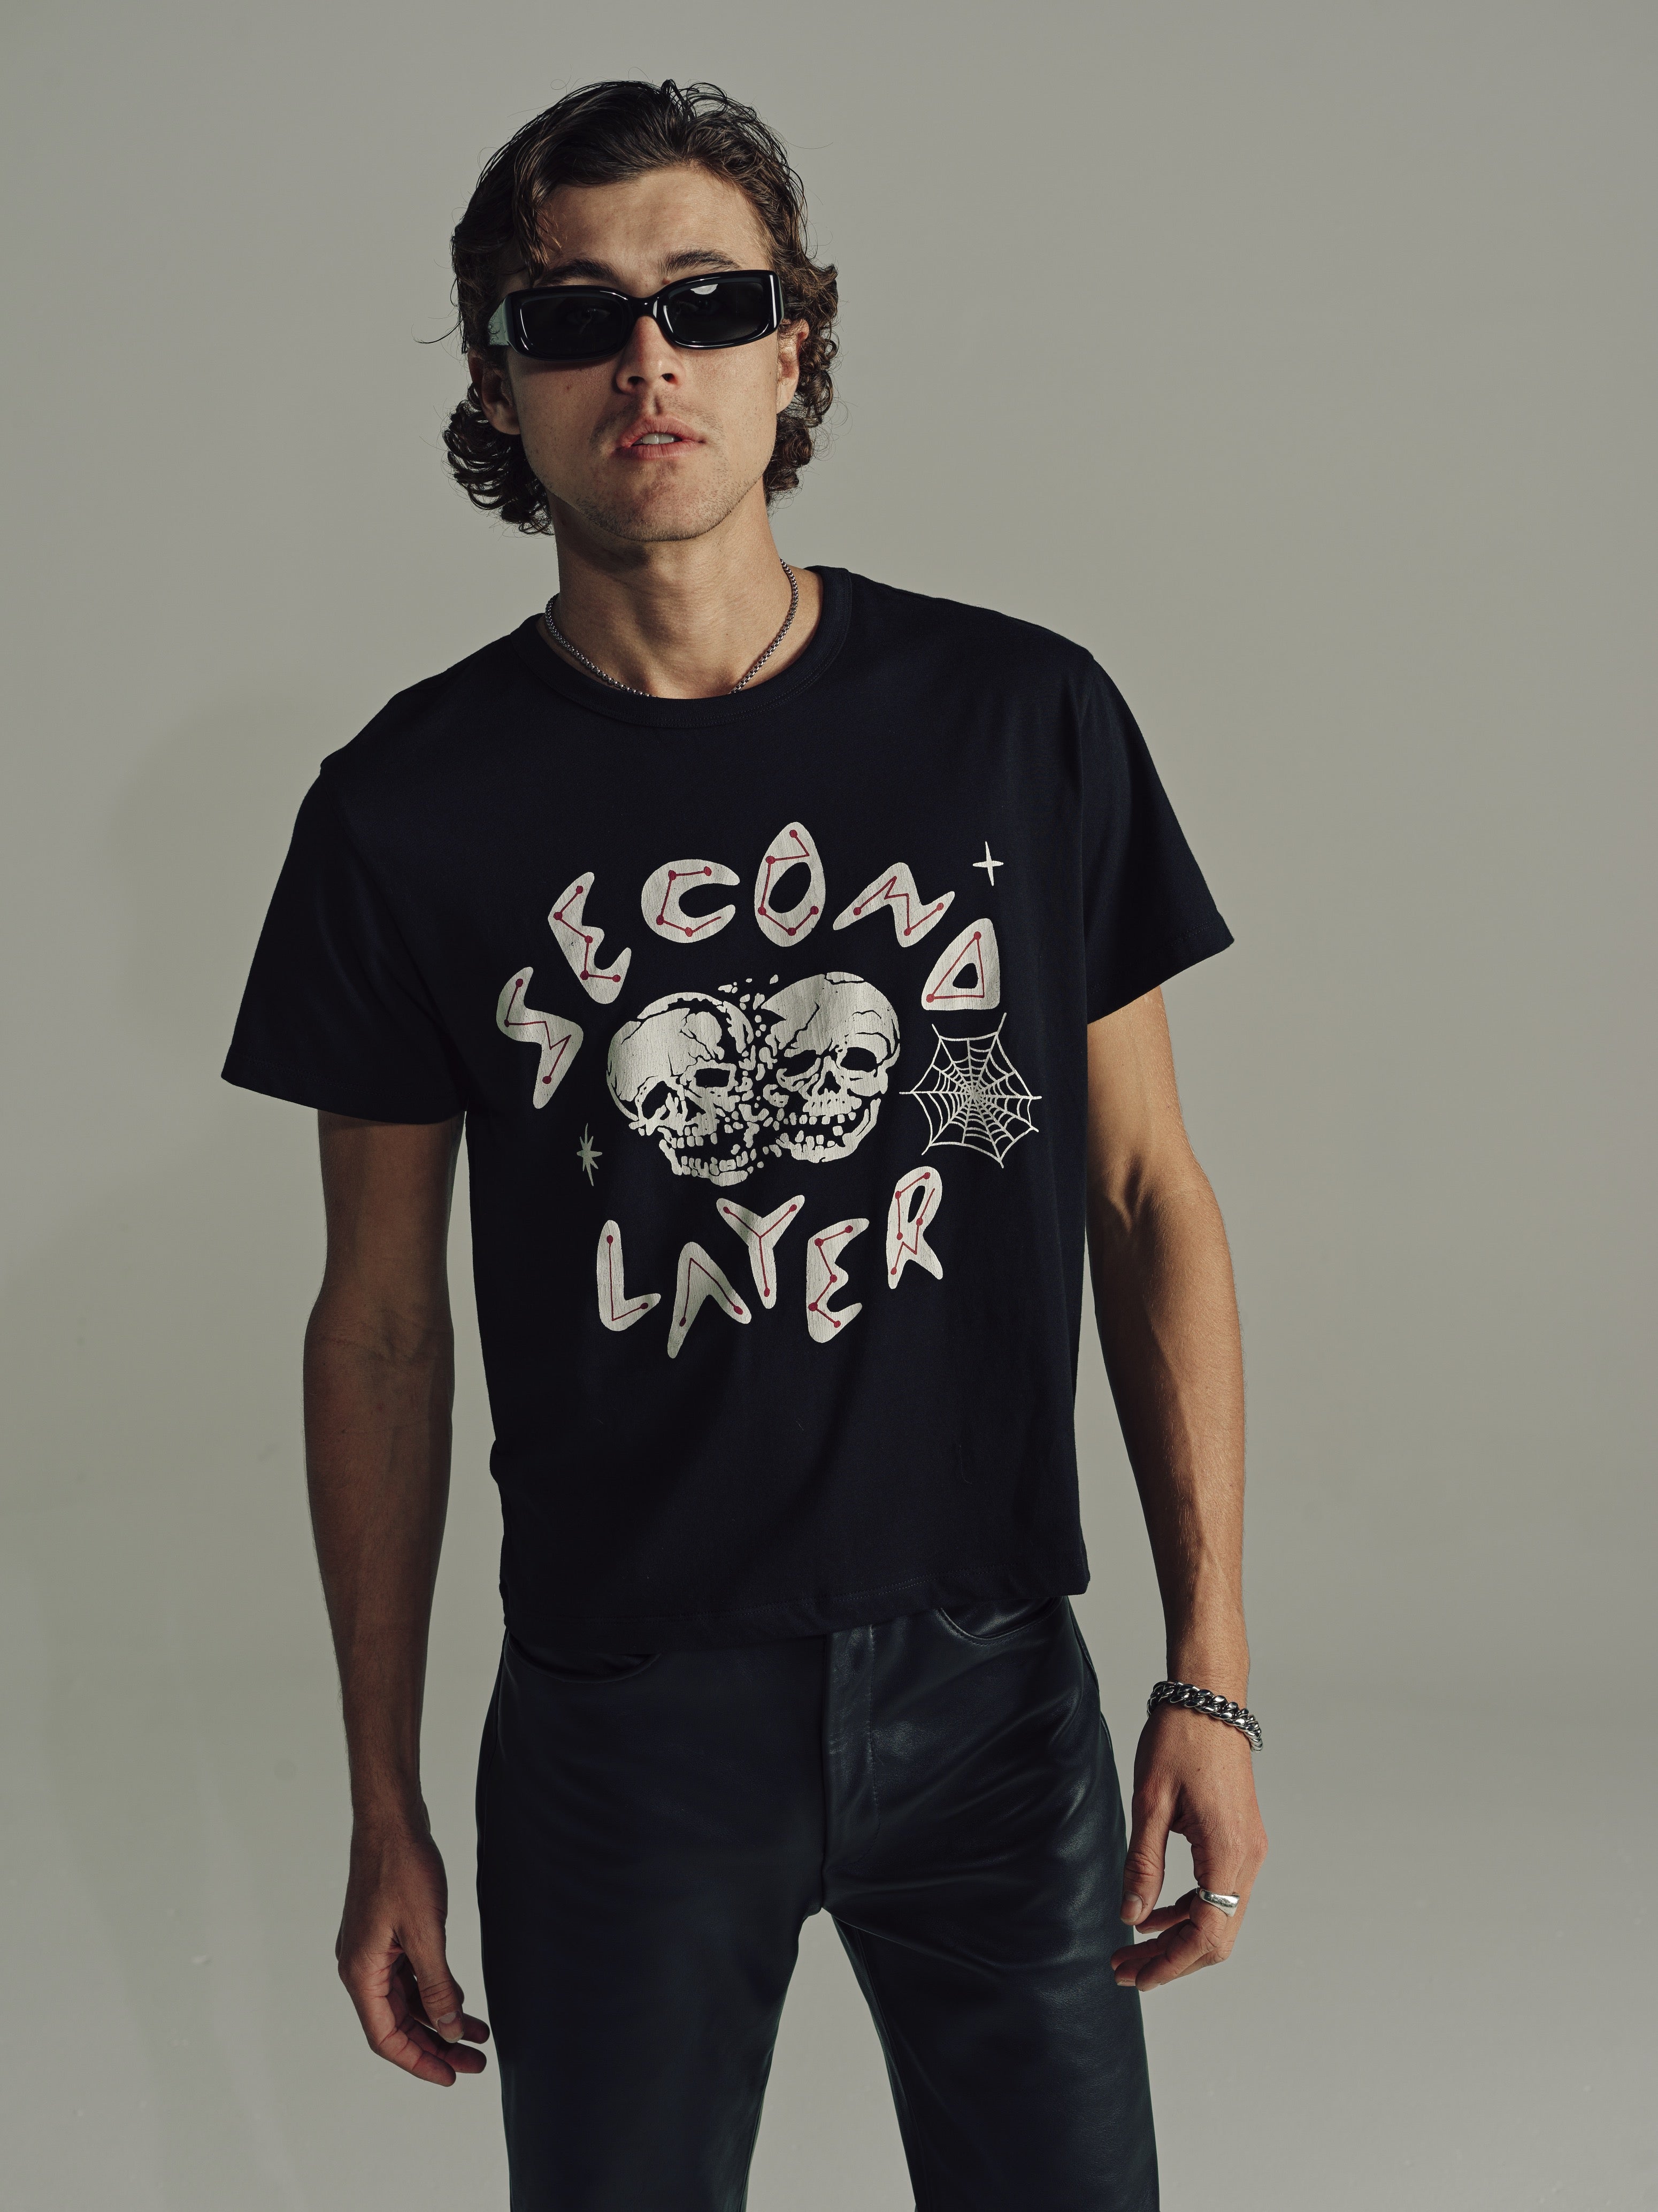 Shop all – SECOND/LAYER Inc.